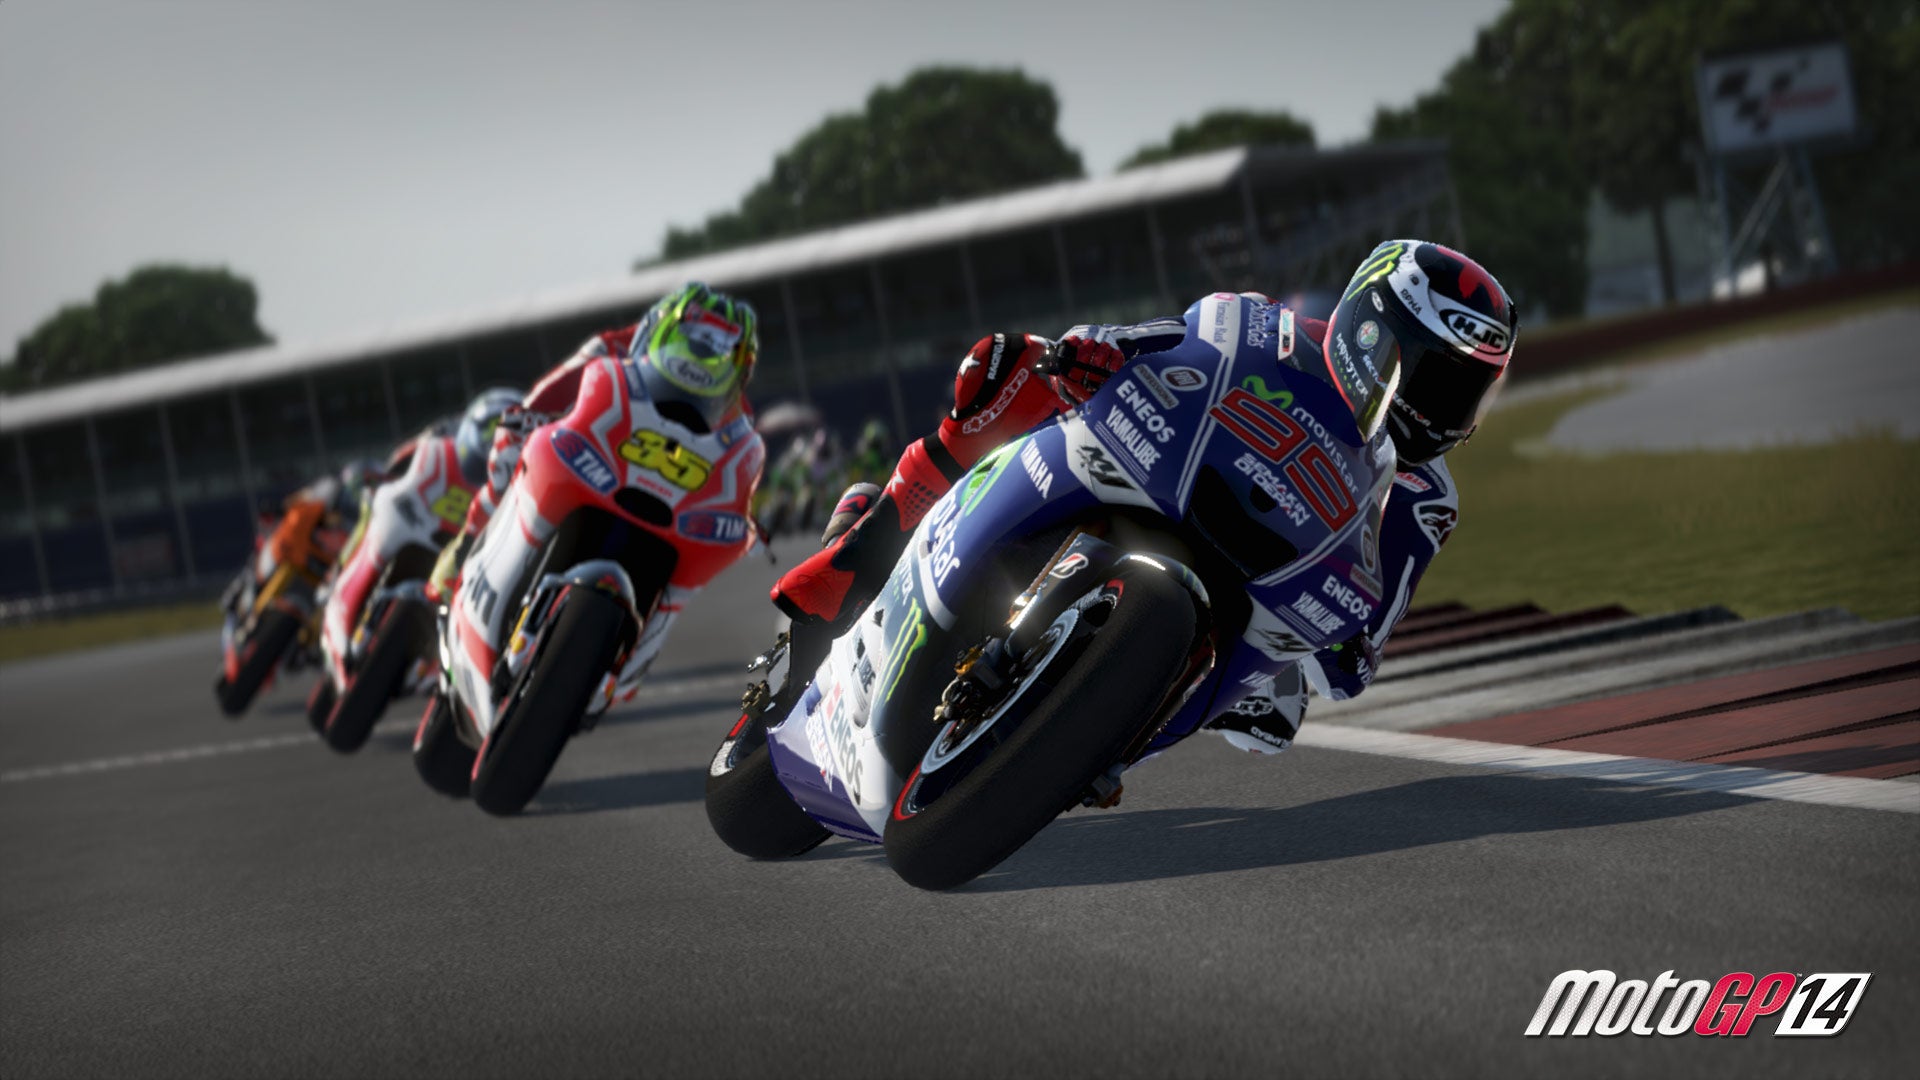 Miss Follow Enroll MotoGP 14 PS4 Review: Goes Better than it Shows | VG247